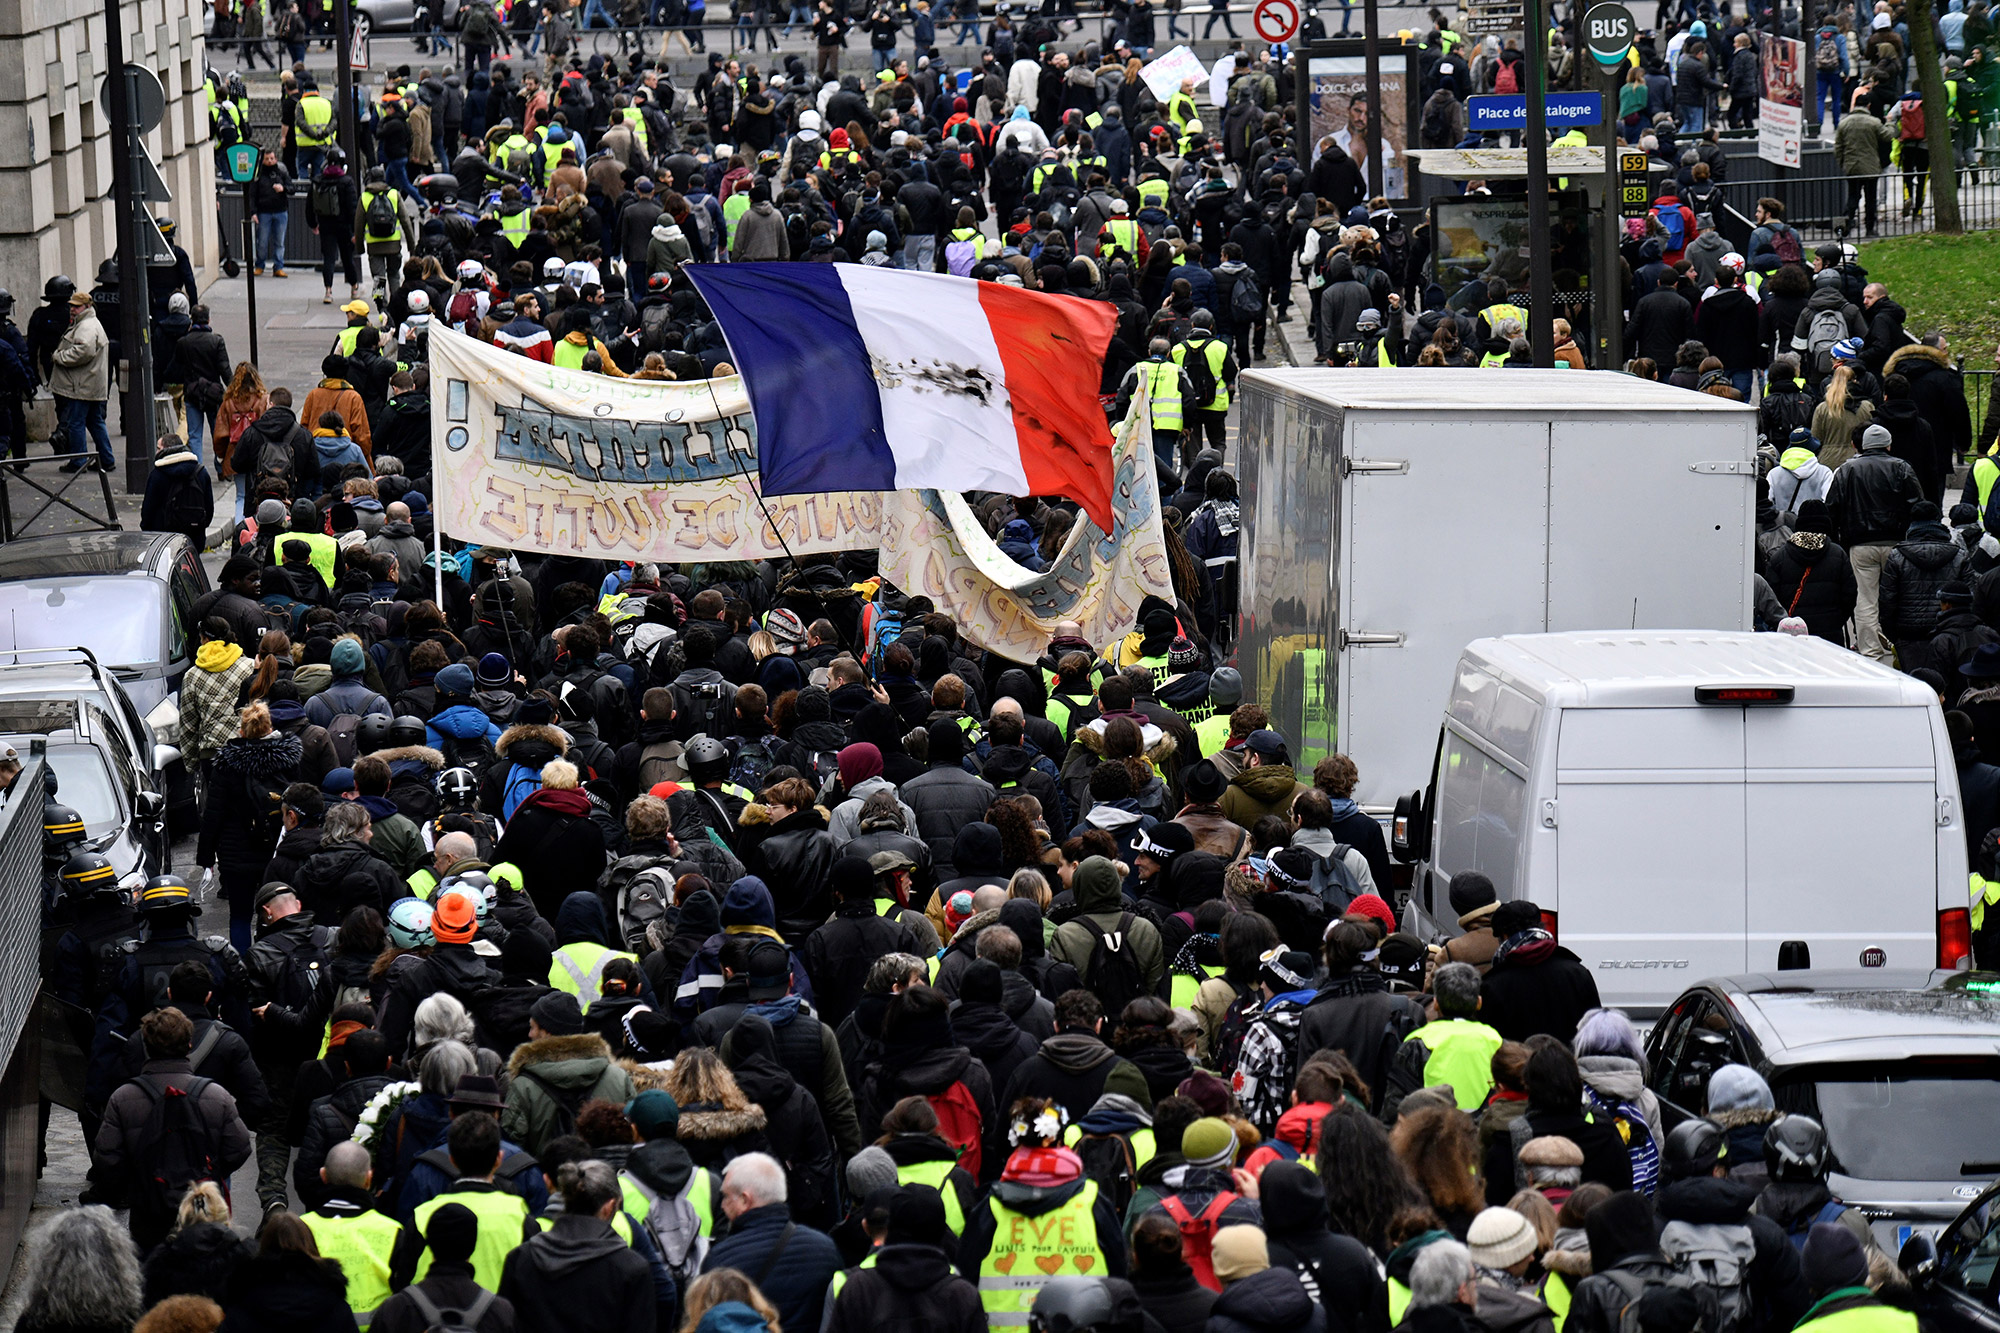 Traveling to France during the protests: What you need to know